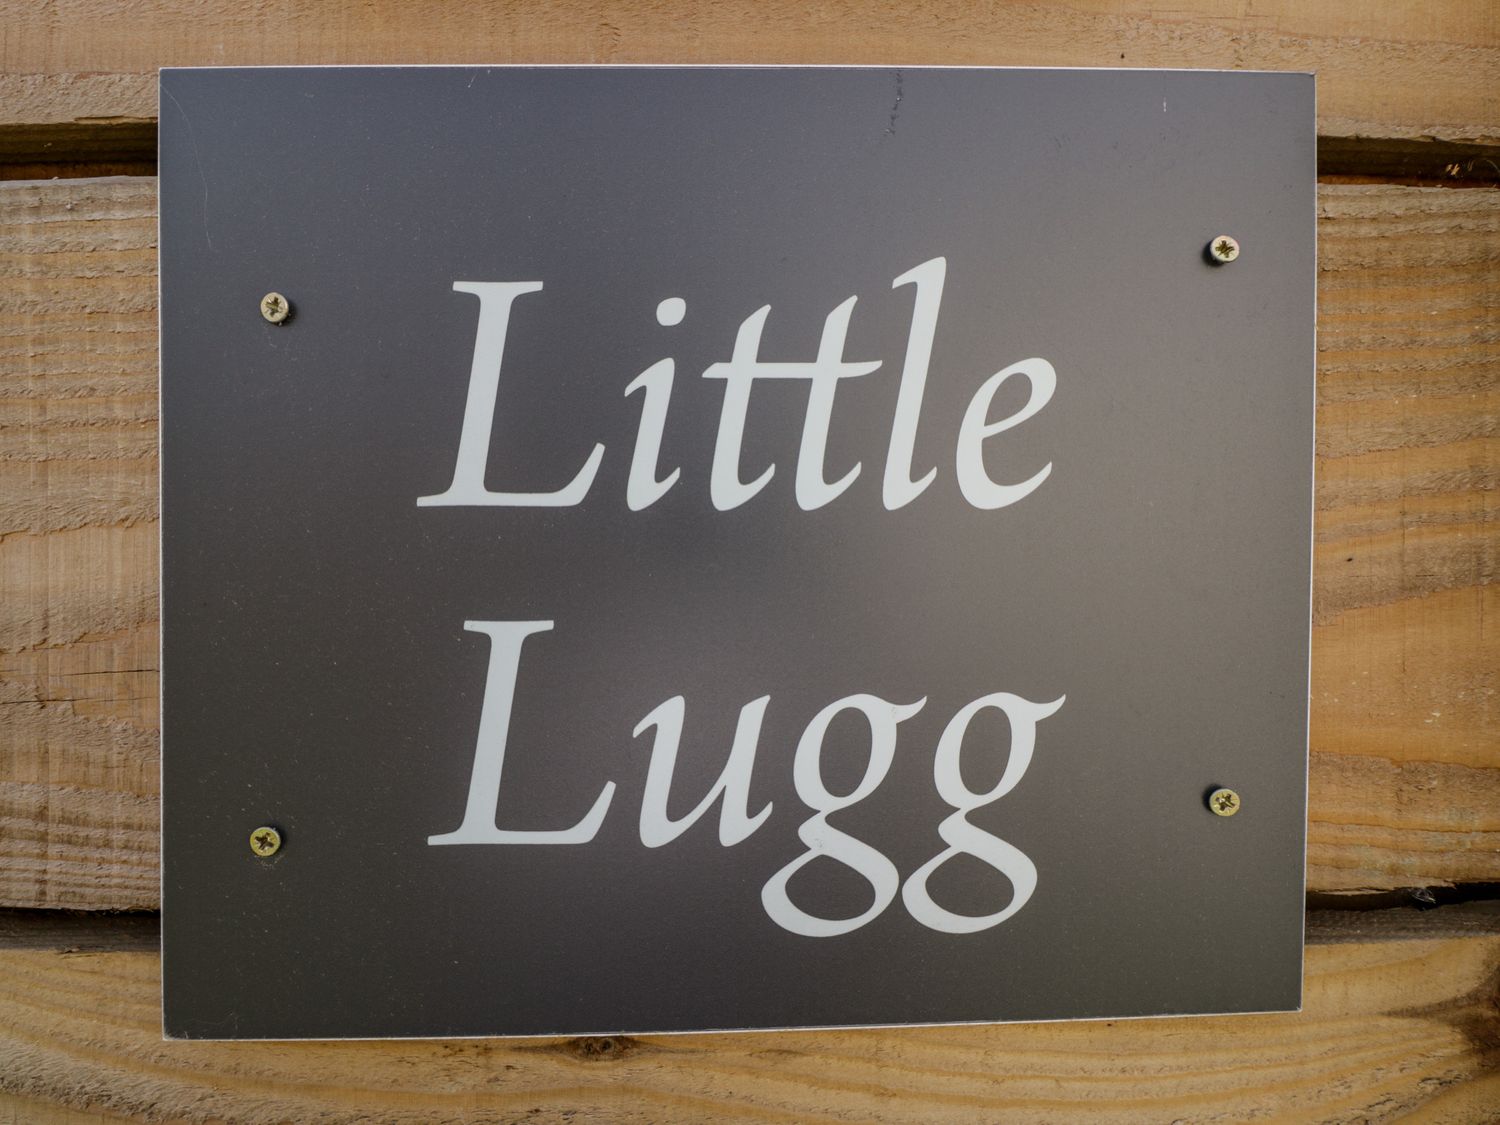 Little Lugg, Hereford